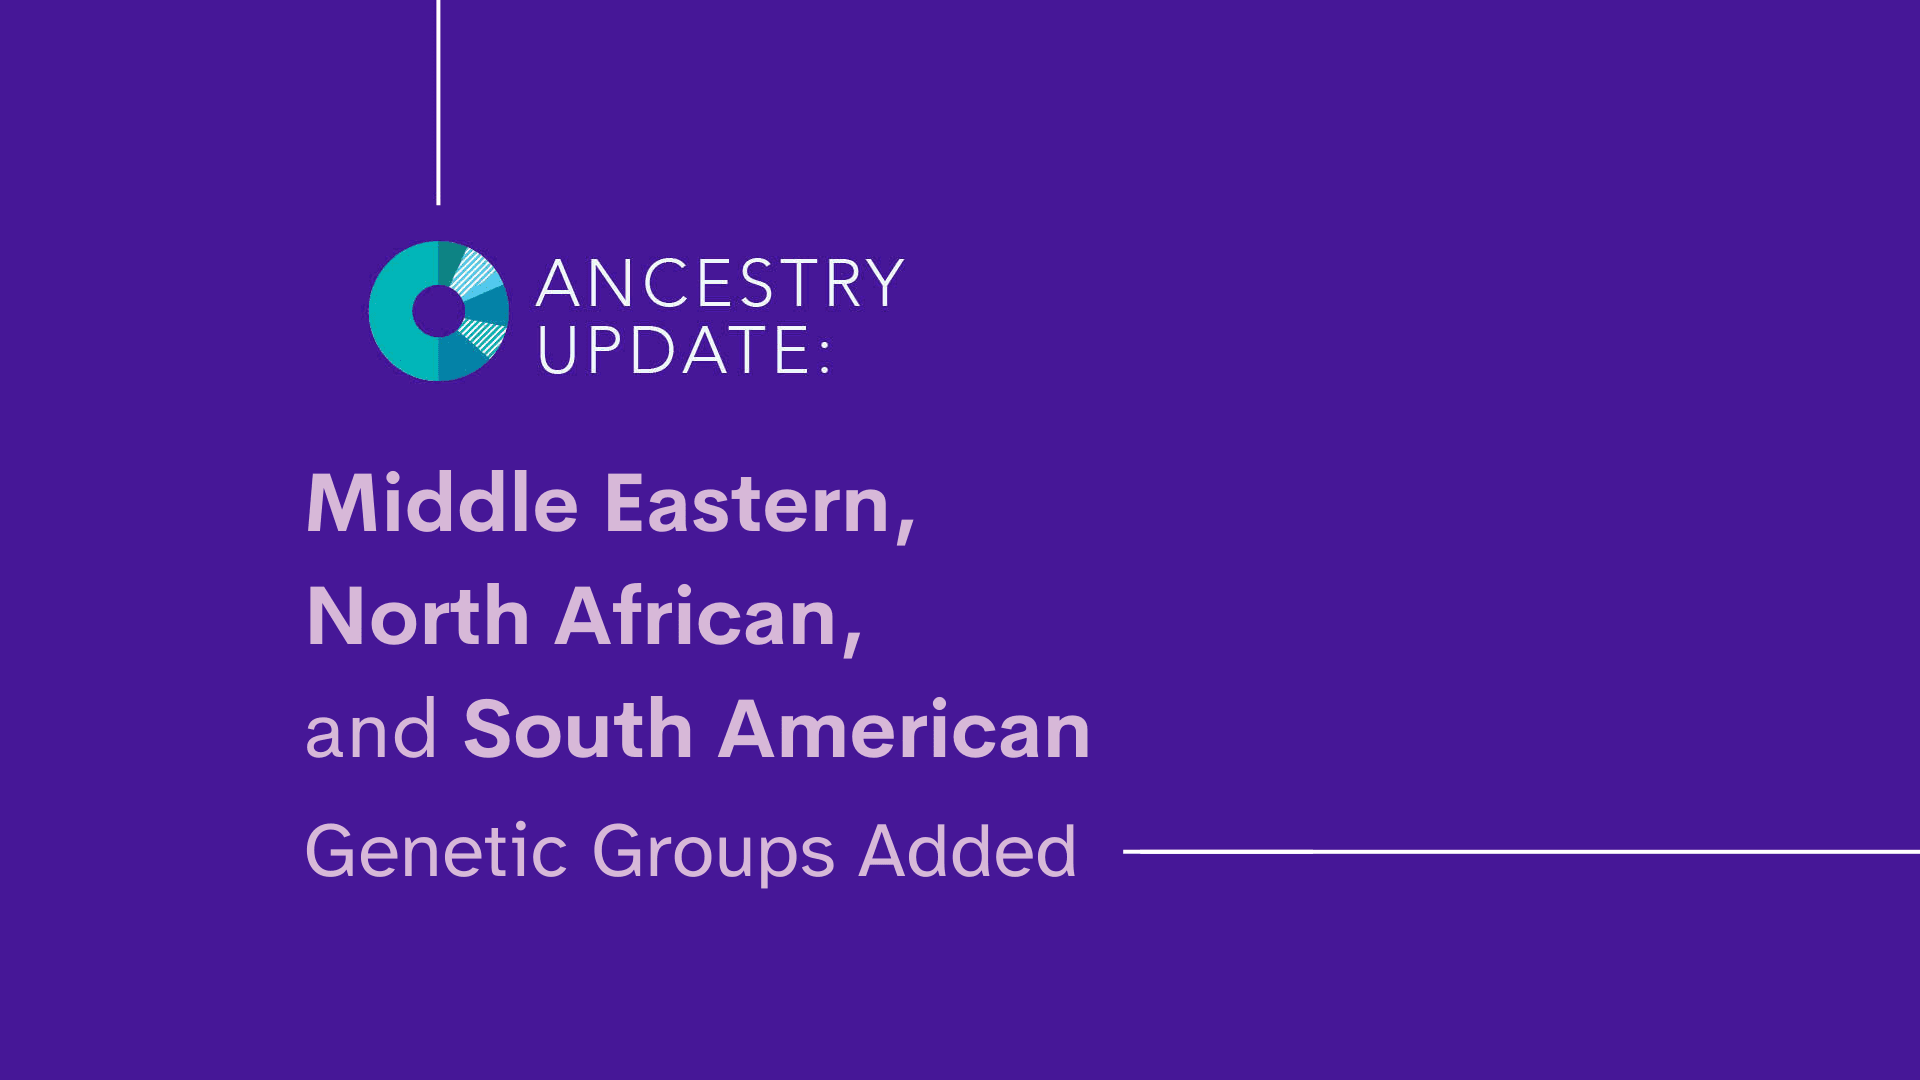 23andMe Improves Ancestry Results for People with South American, Levantine, Sephardic, and Mizrahi Genetic Ancestry